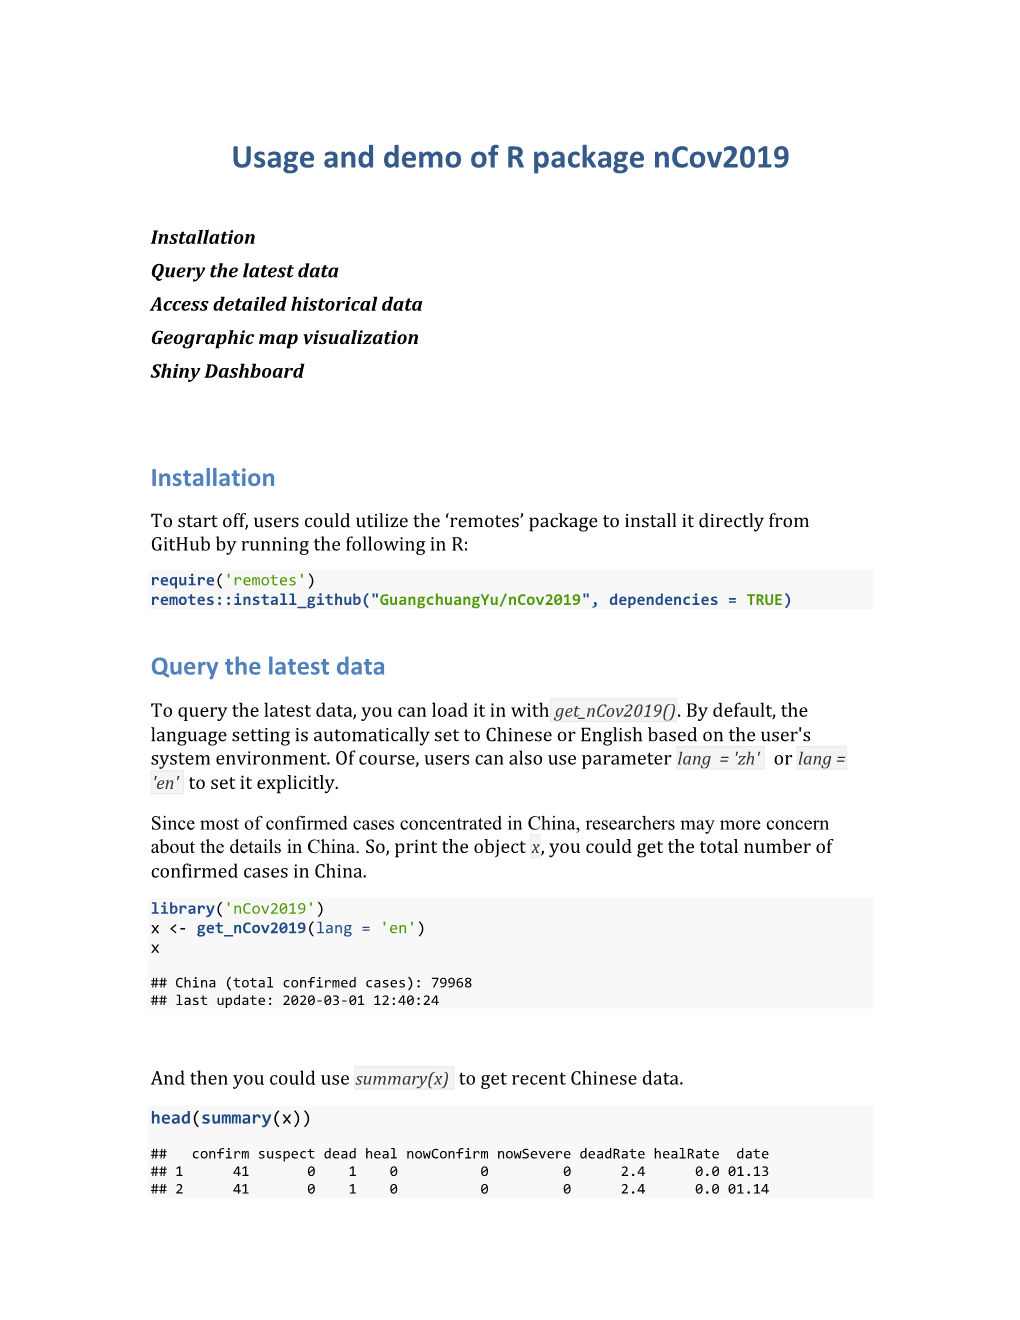 Usage and Demo of R Package Ncov2019